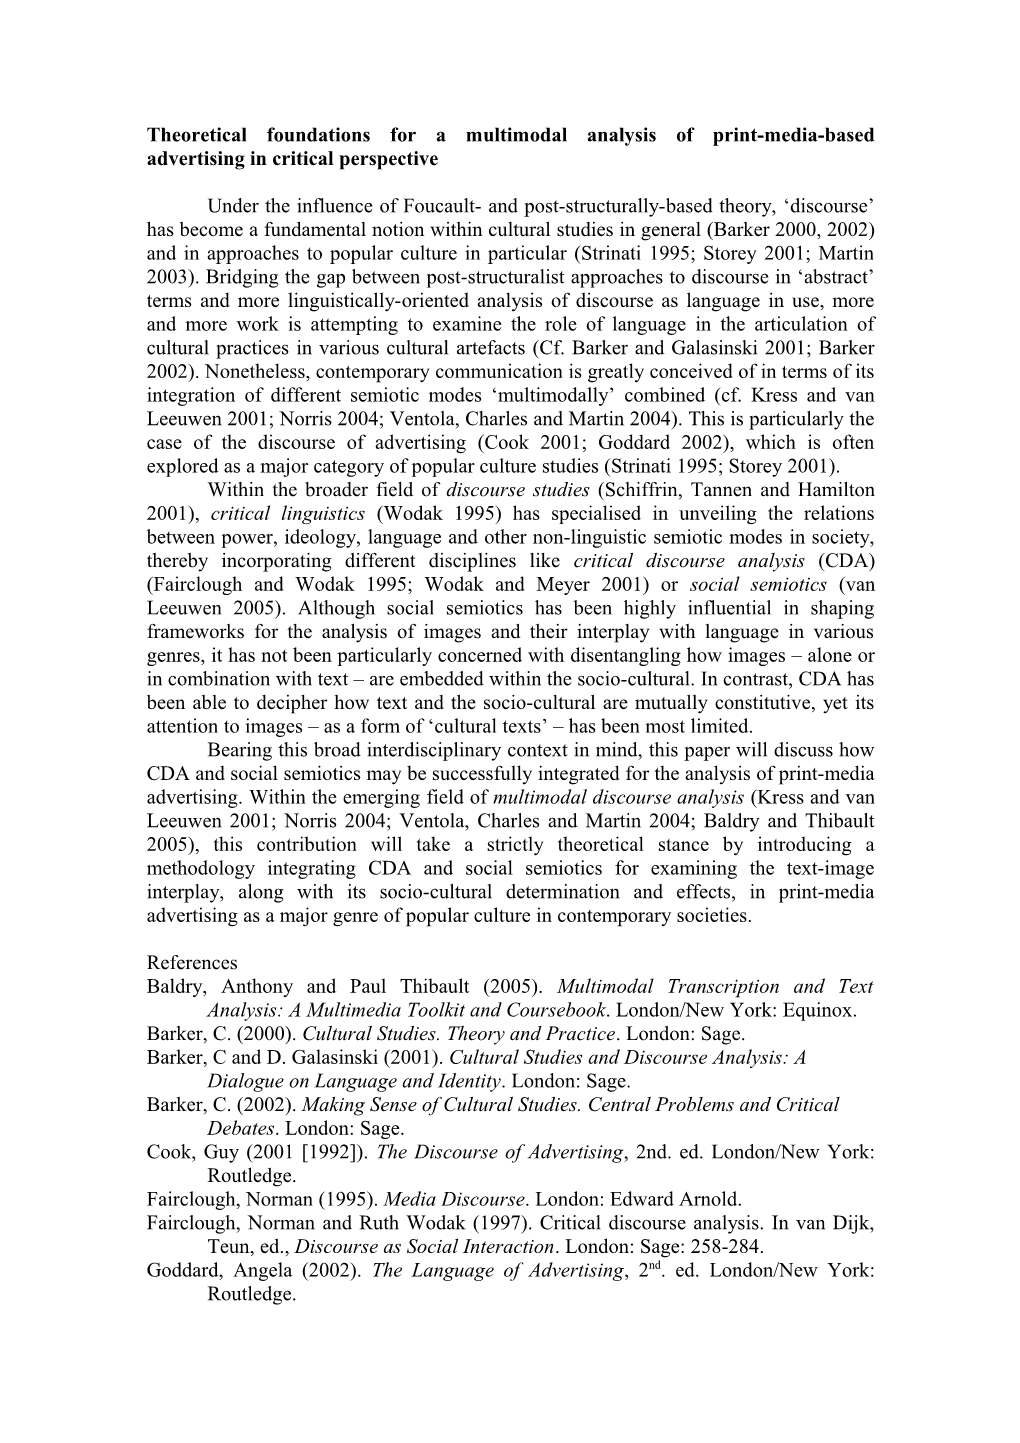 Theoretical Foundations for a Multimodal Analysis of Print-Media-Based Advertising In